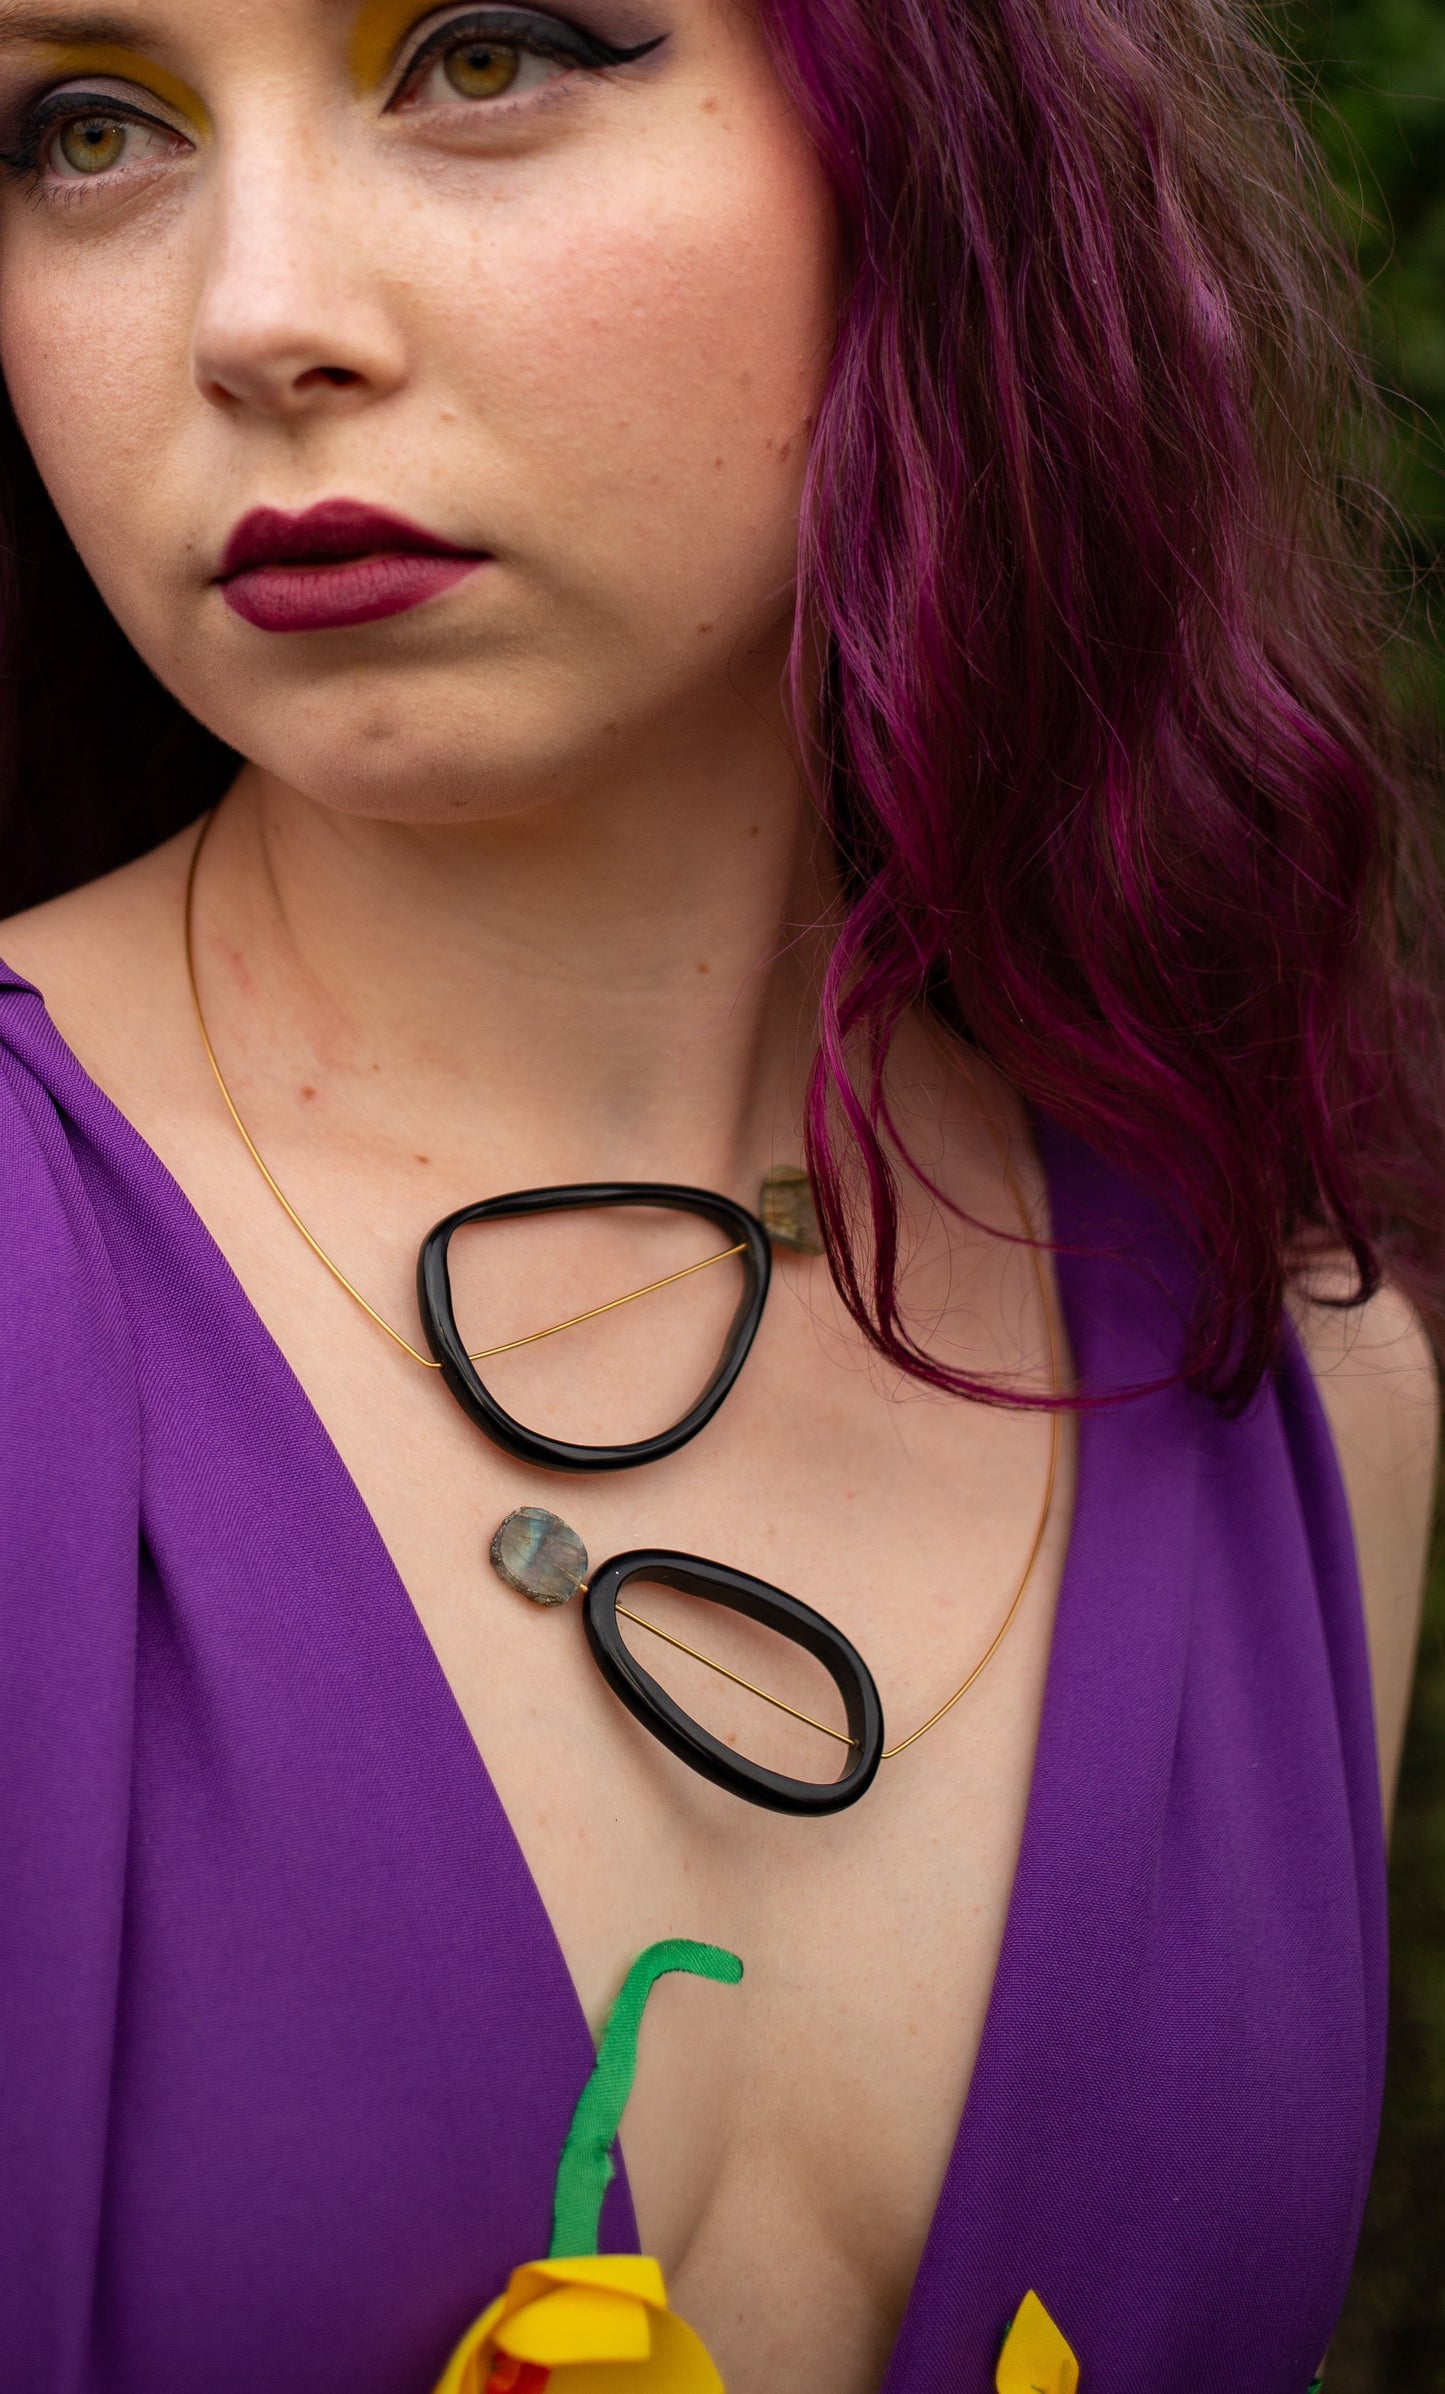 Asymmetric Neckwire with Bull Horn and Labradorite